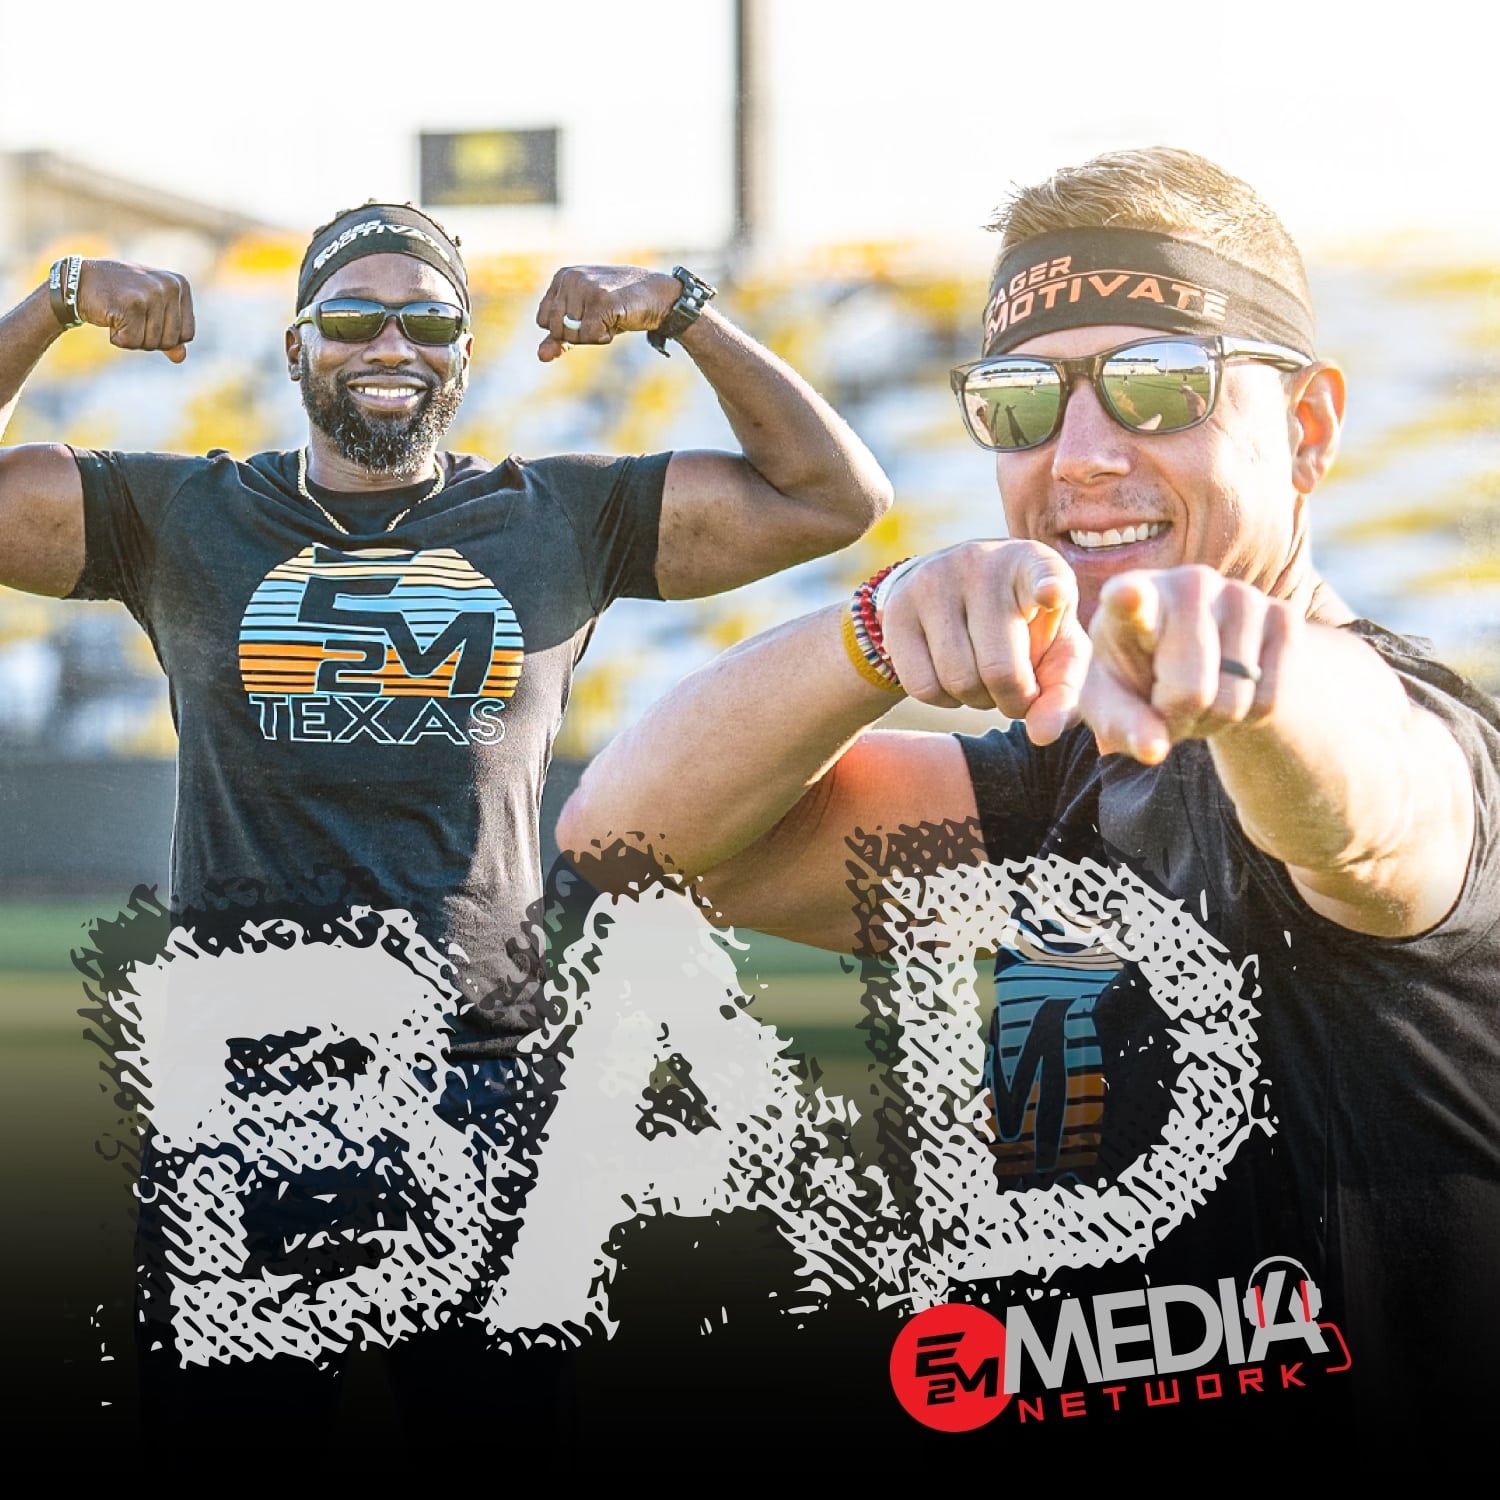 E2M Fitness Media Network – BAD Podcast – Winners Win “How you do anything  is how you do everything.”